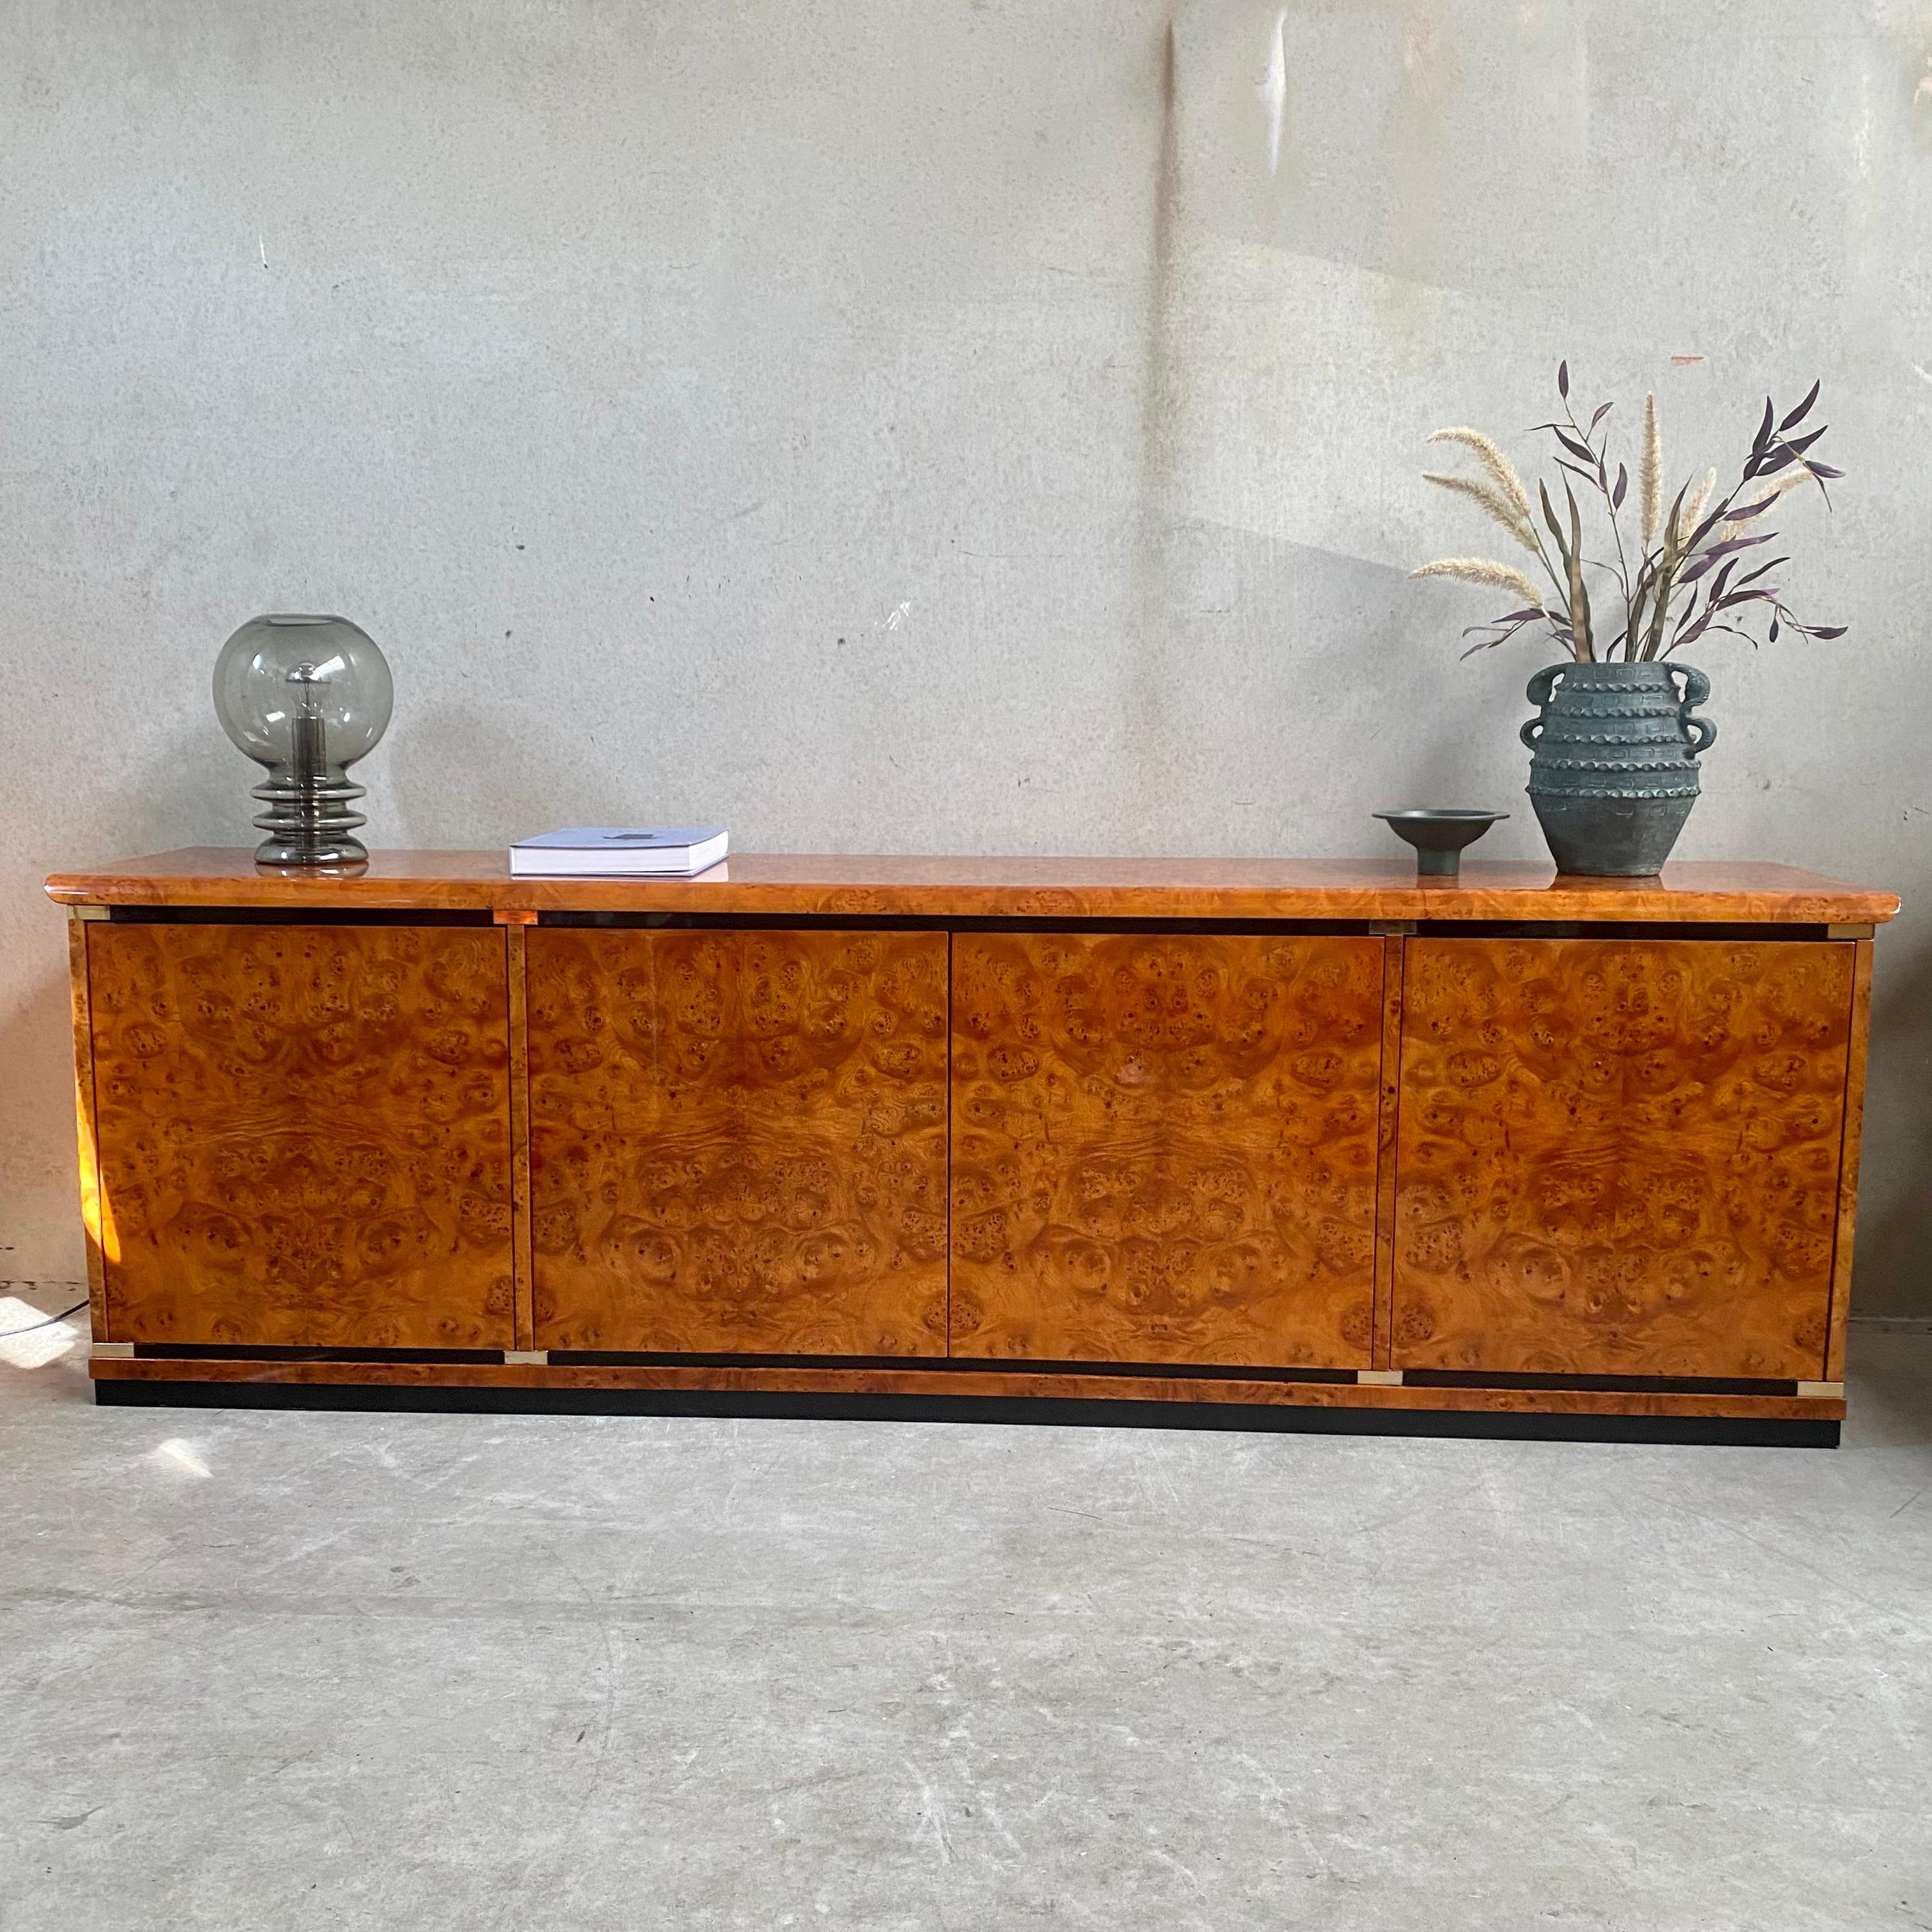 Italian Briar Burl Wood Sideboard by Guerini Emilio for Gdm 24 Kt Gold Plated Italy 1980 For Sale